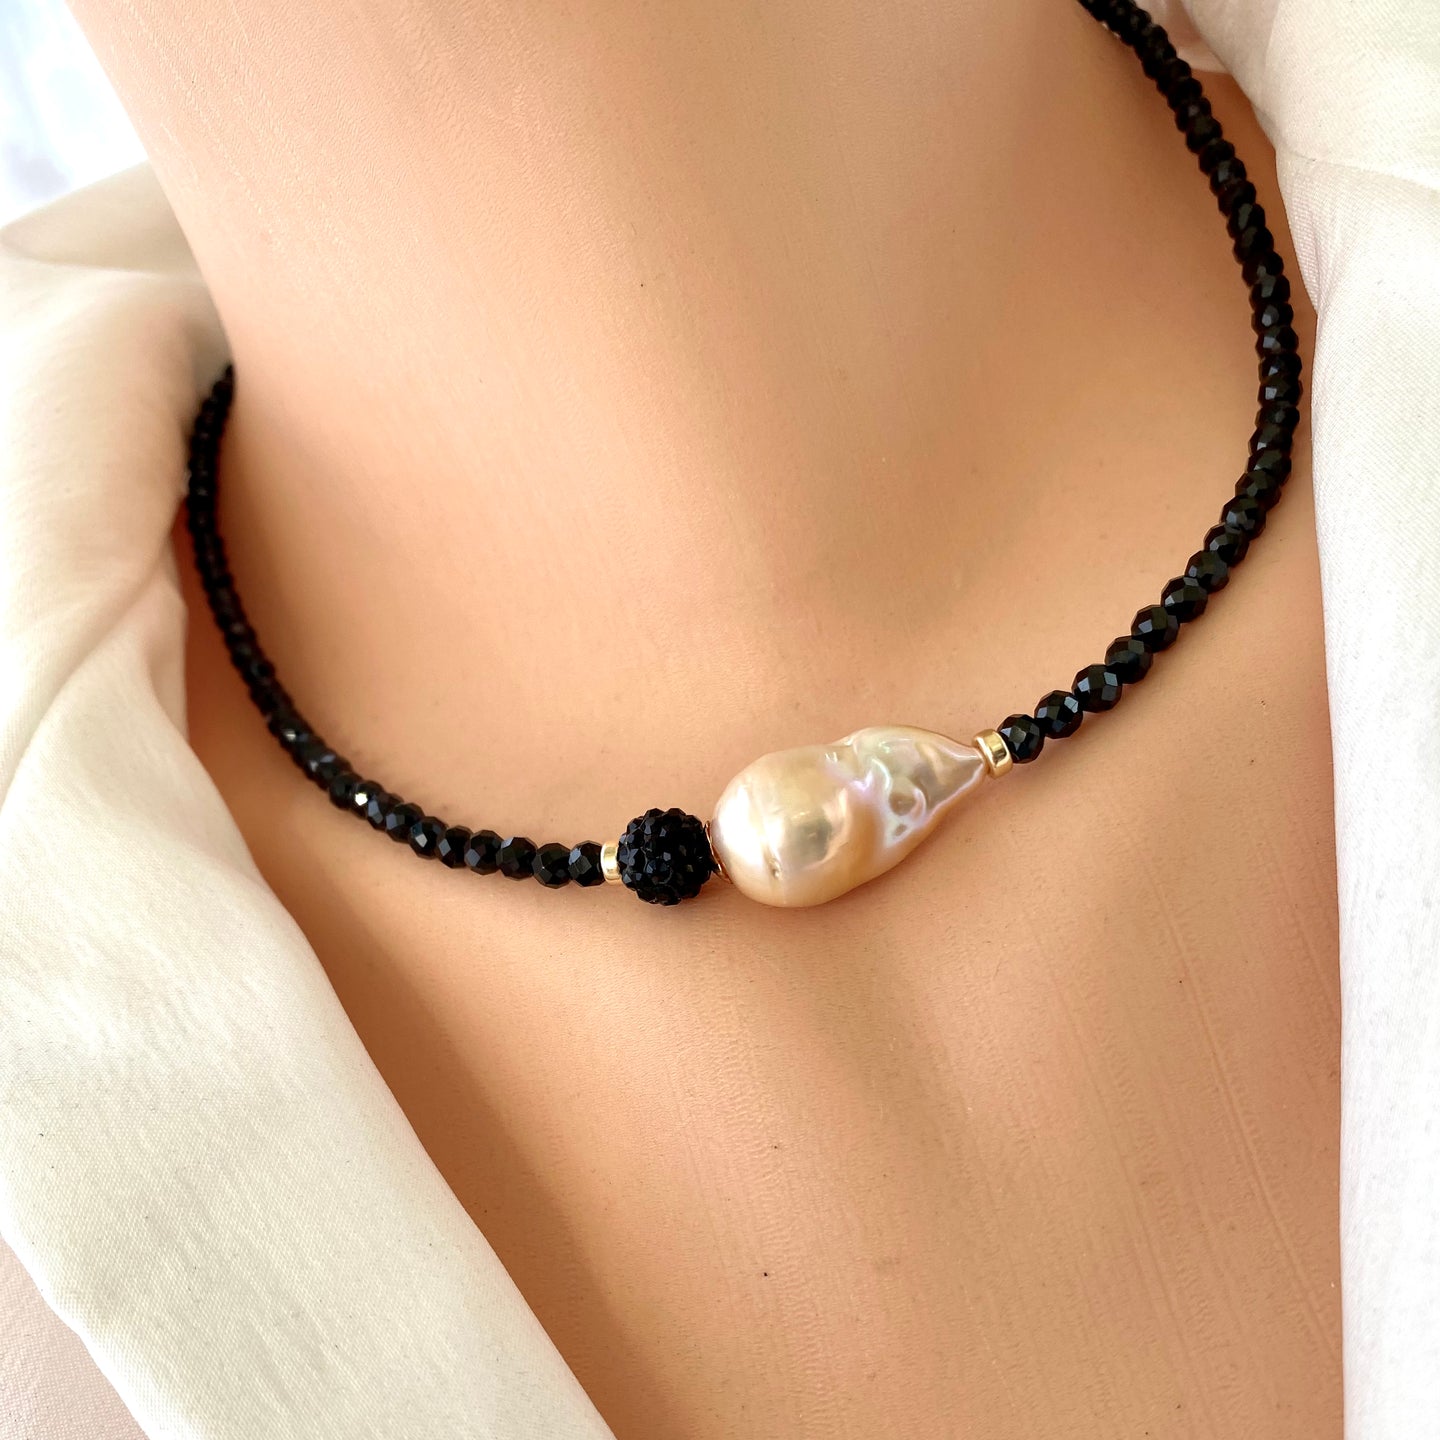 Festive Black Spinel and Golden Pink Baroque Pearl Beaded Necklace with Gold Filled Details, 17.5